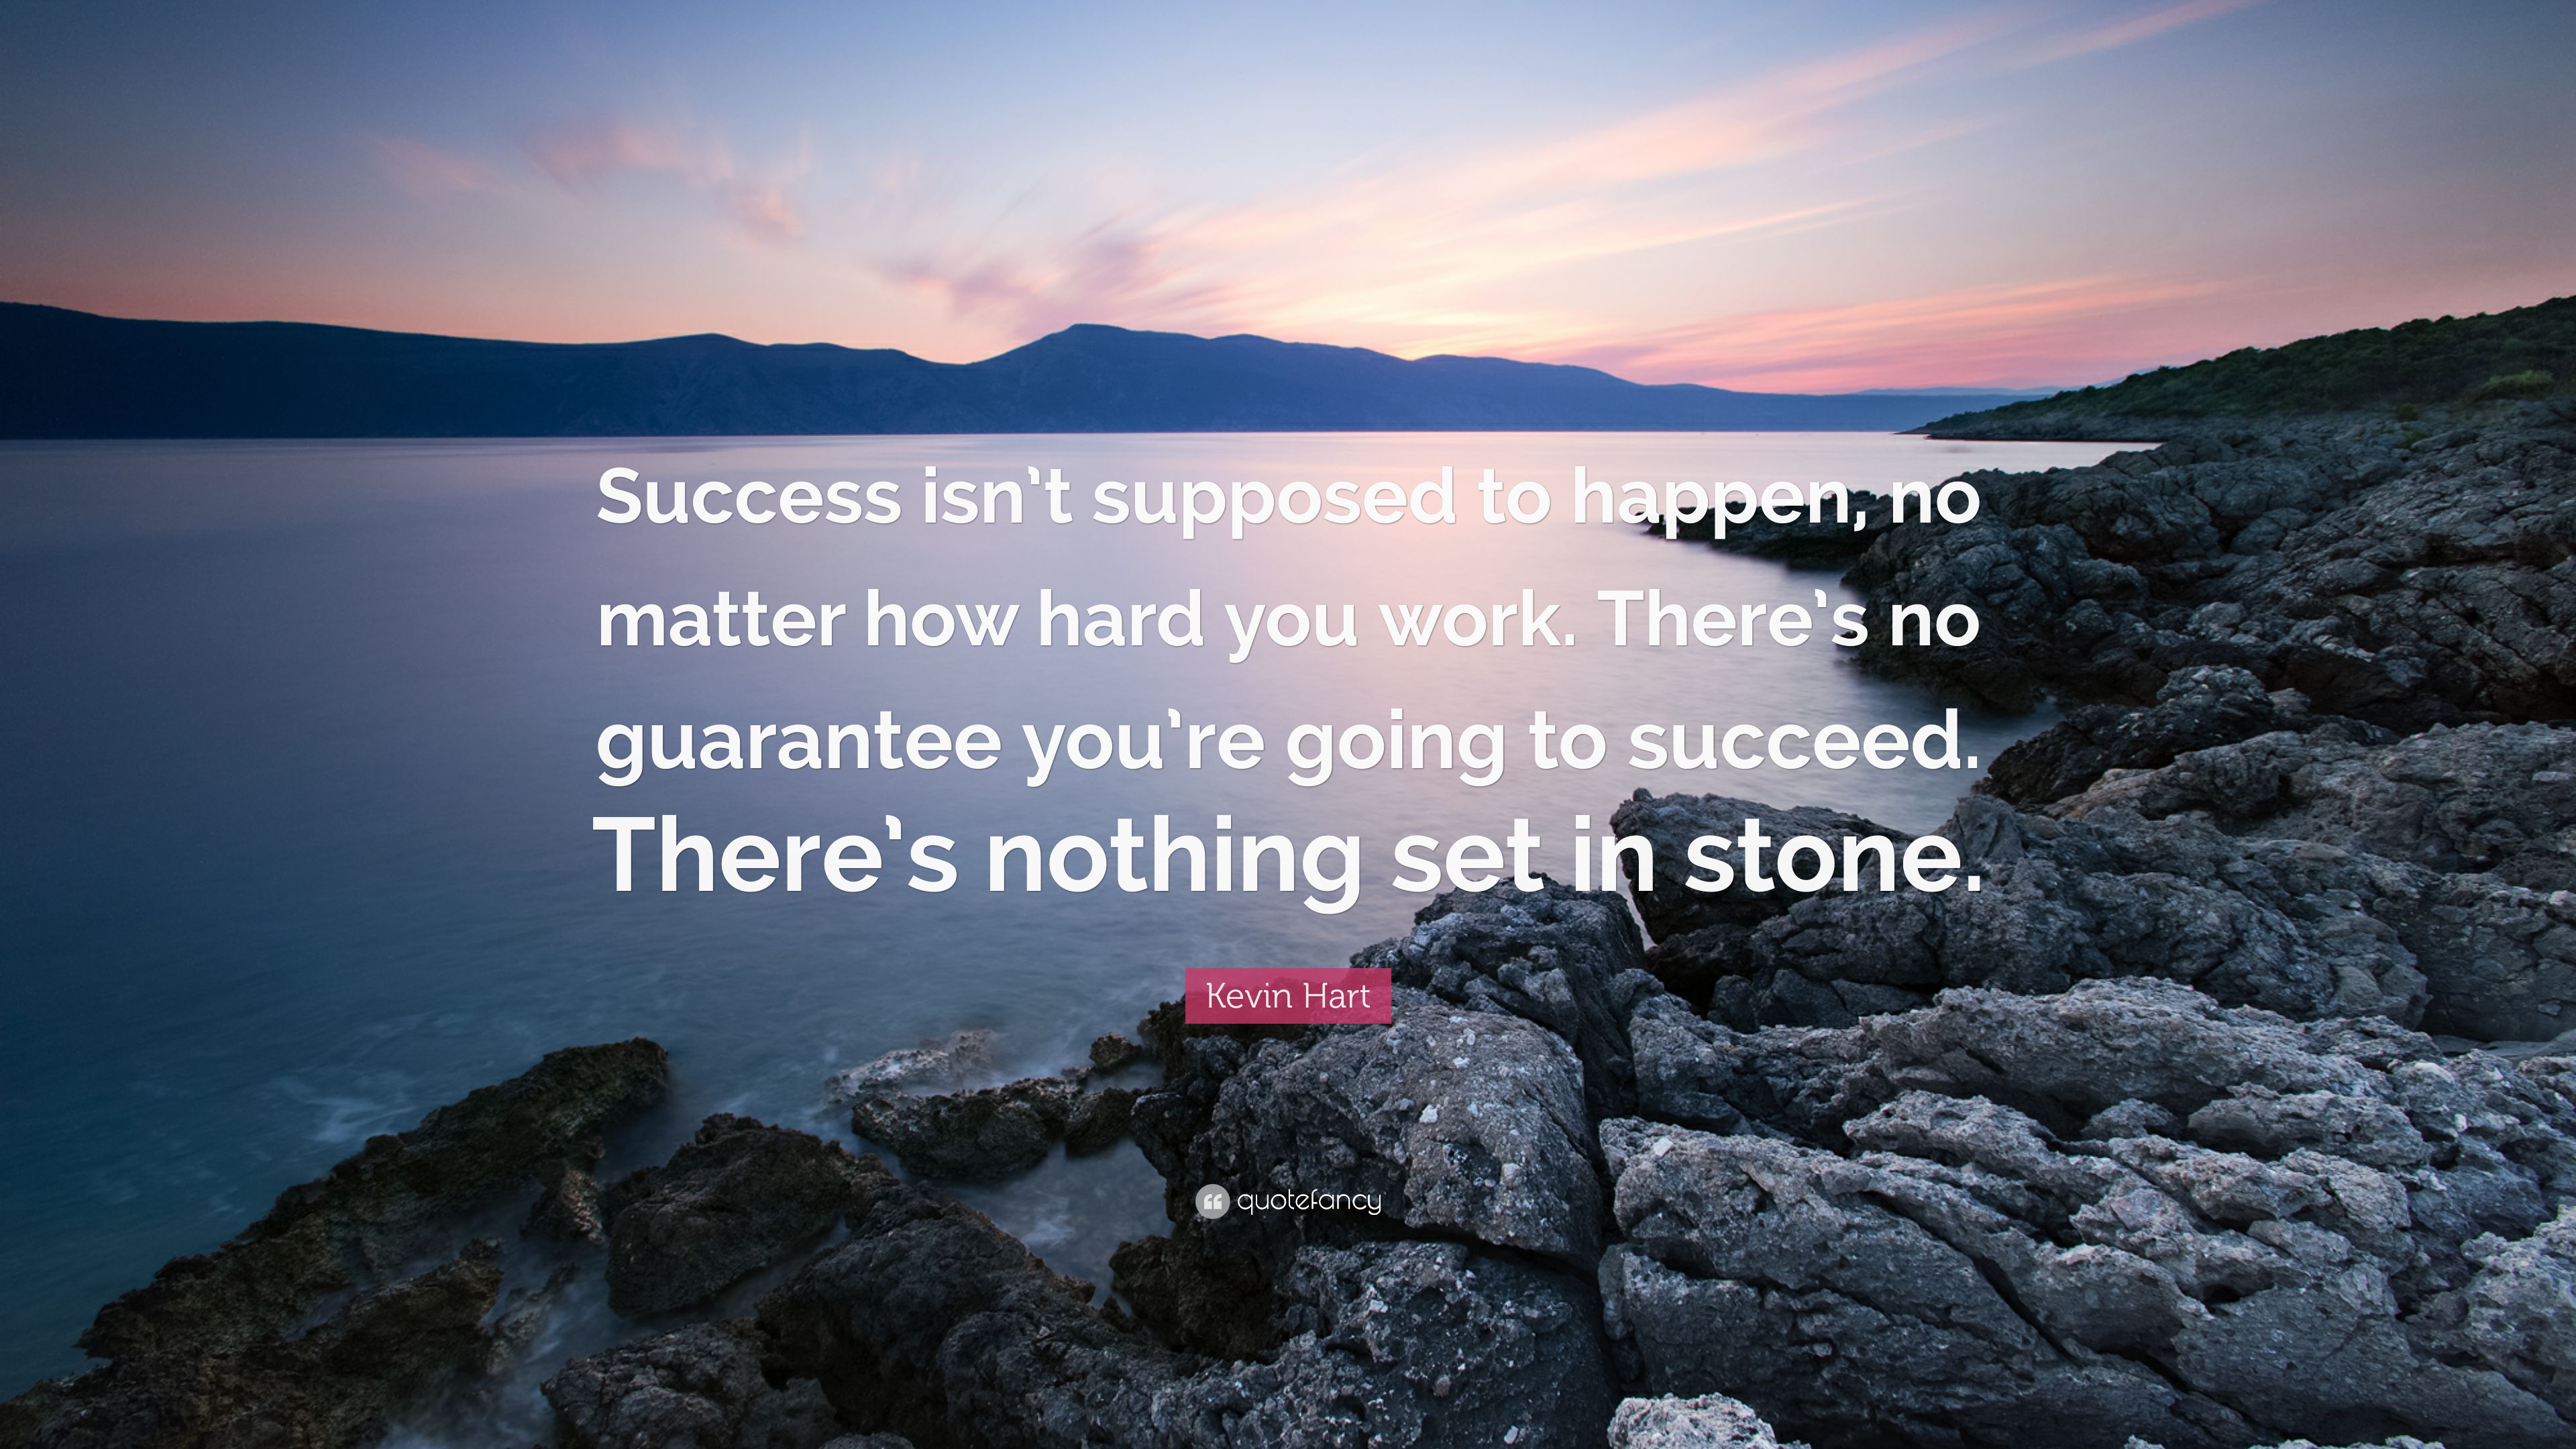 Kevin Hart Quote: “Success isn't supposed to happen, no matter how